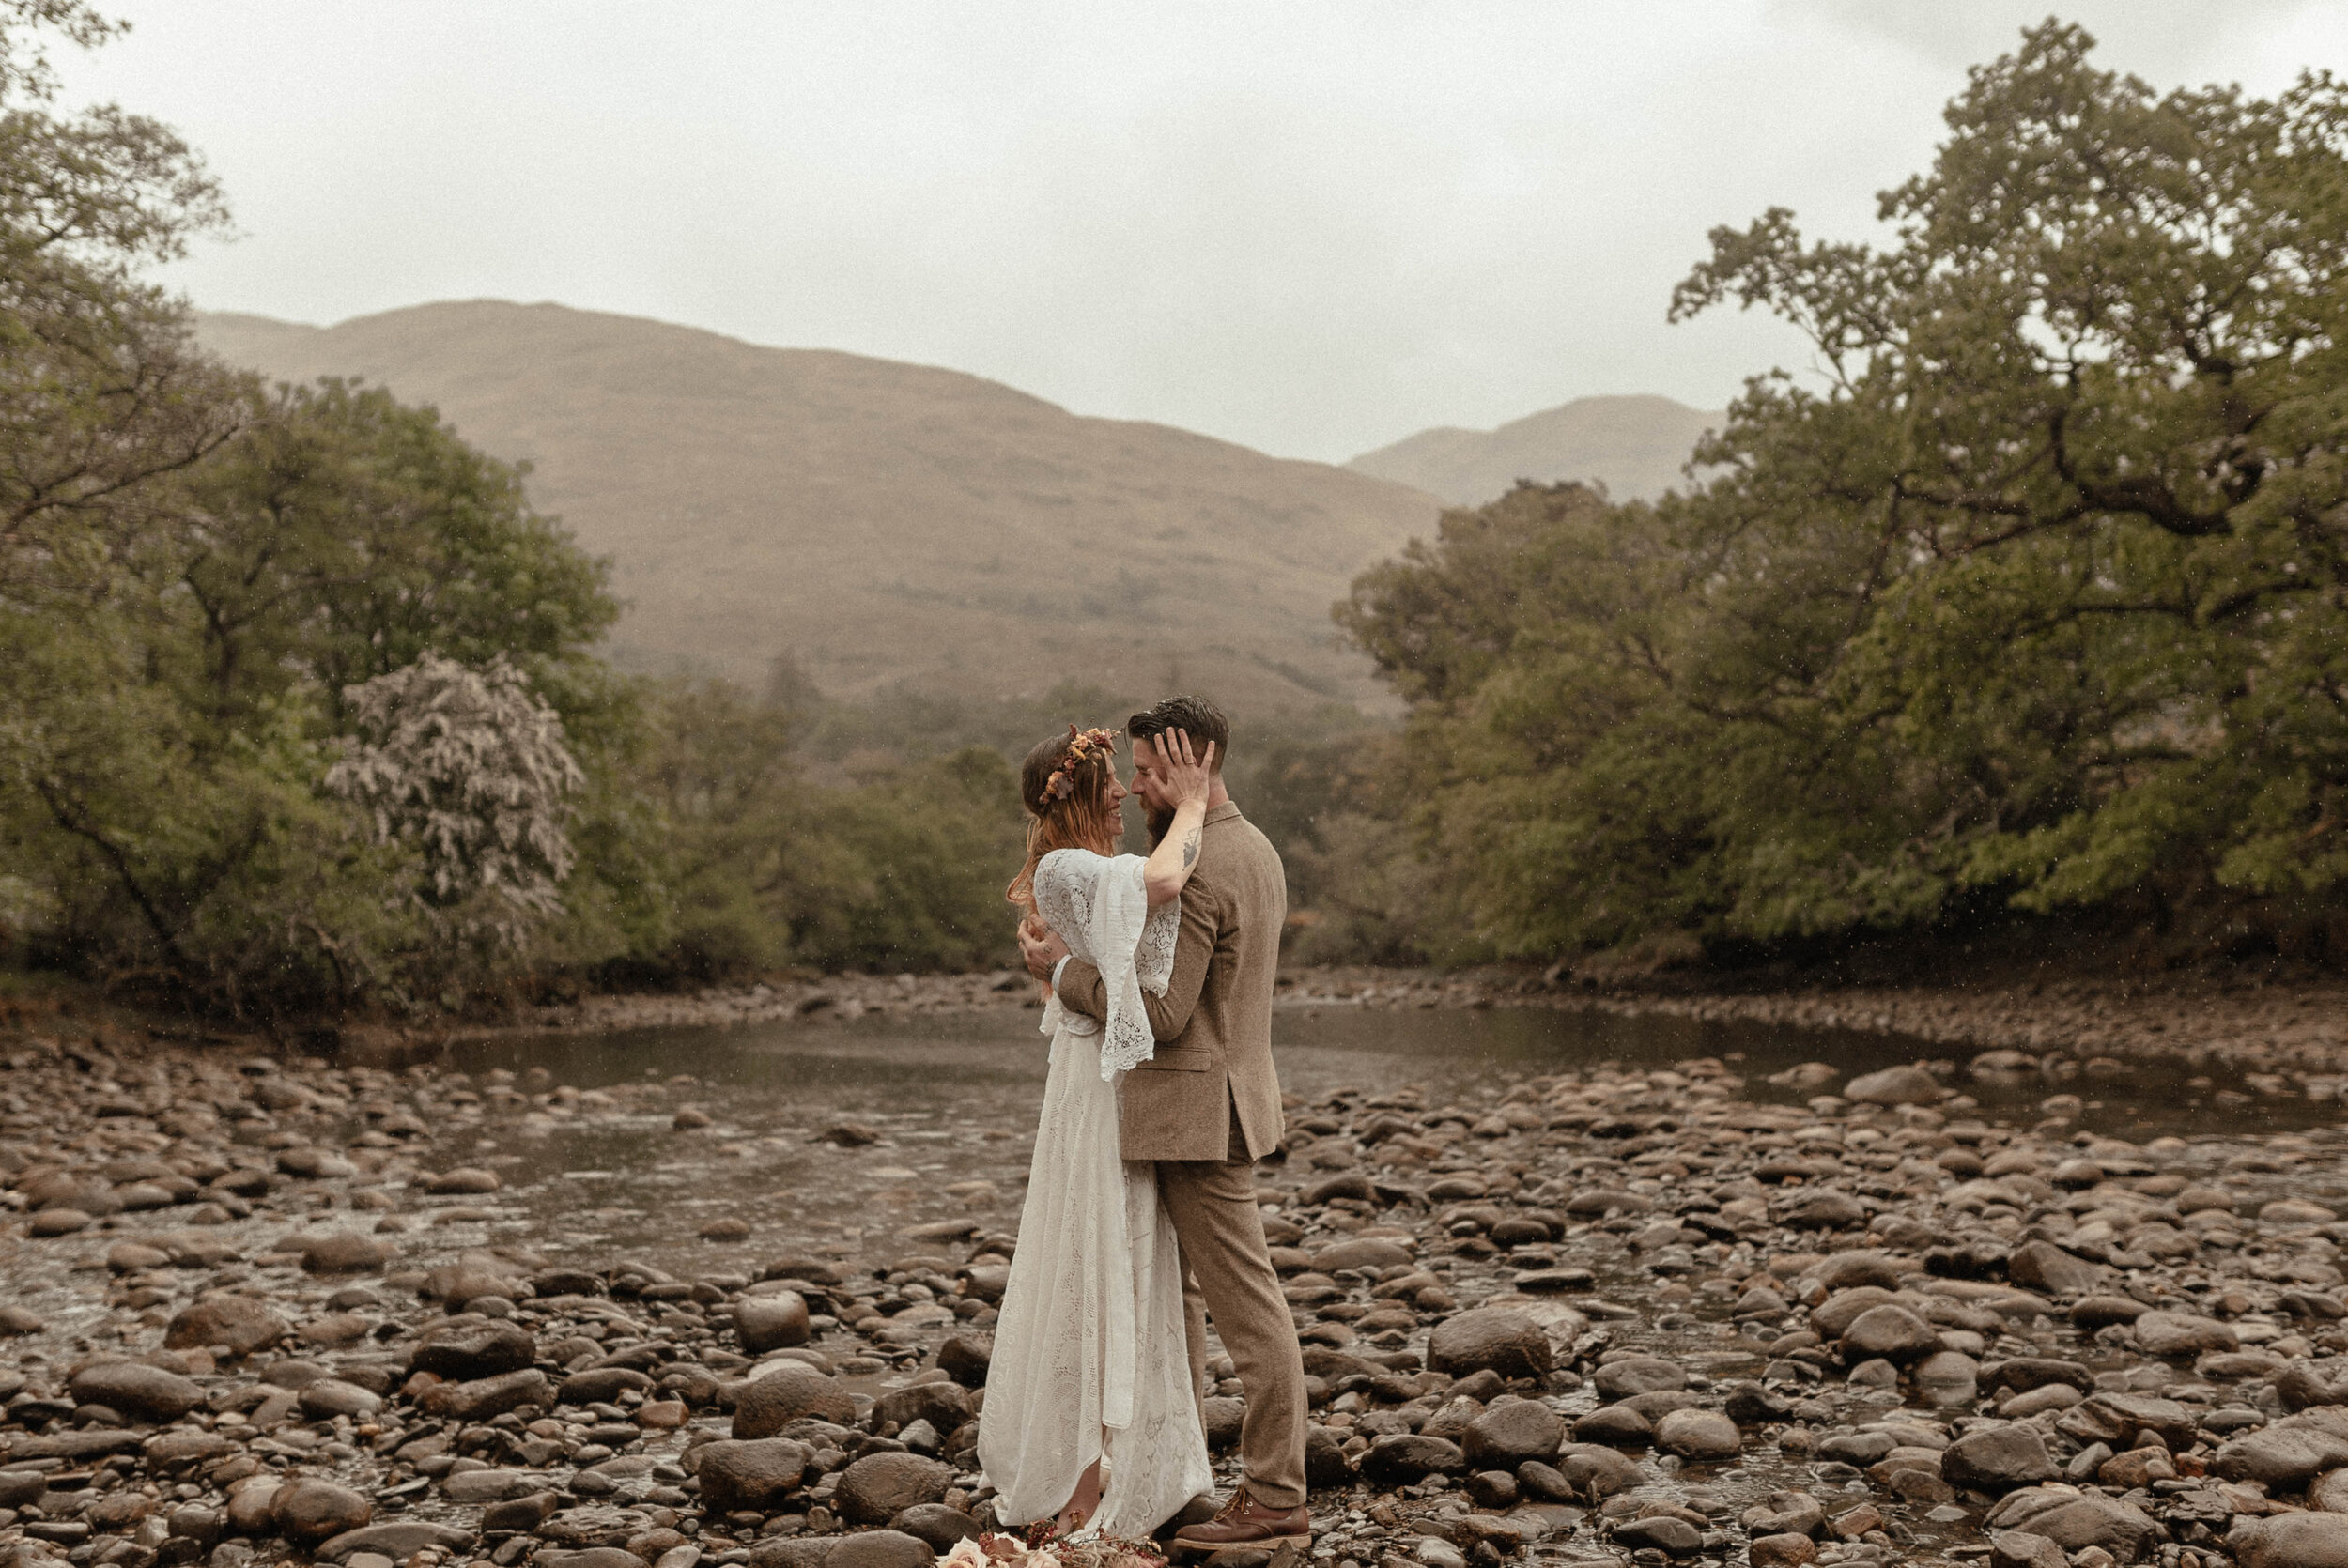 Intimate Elopement in the Scottish Highlands - Tilly Conolly Photo &amp; Film